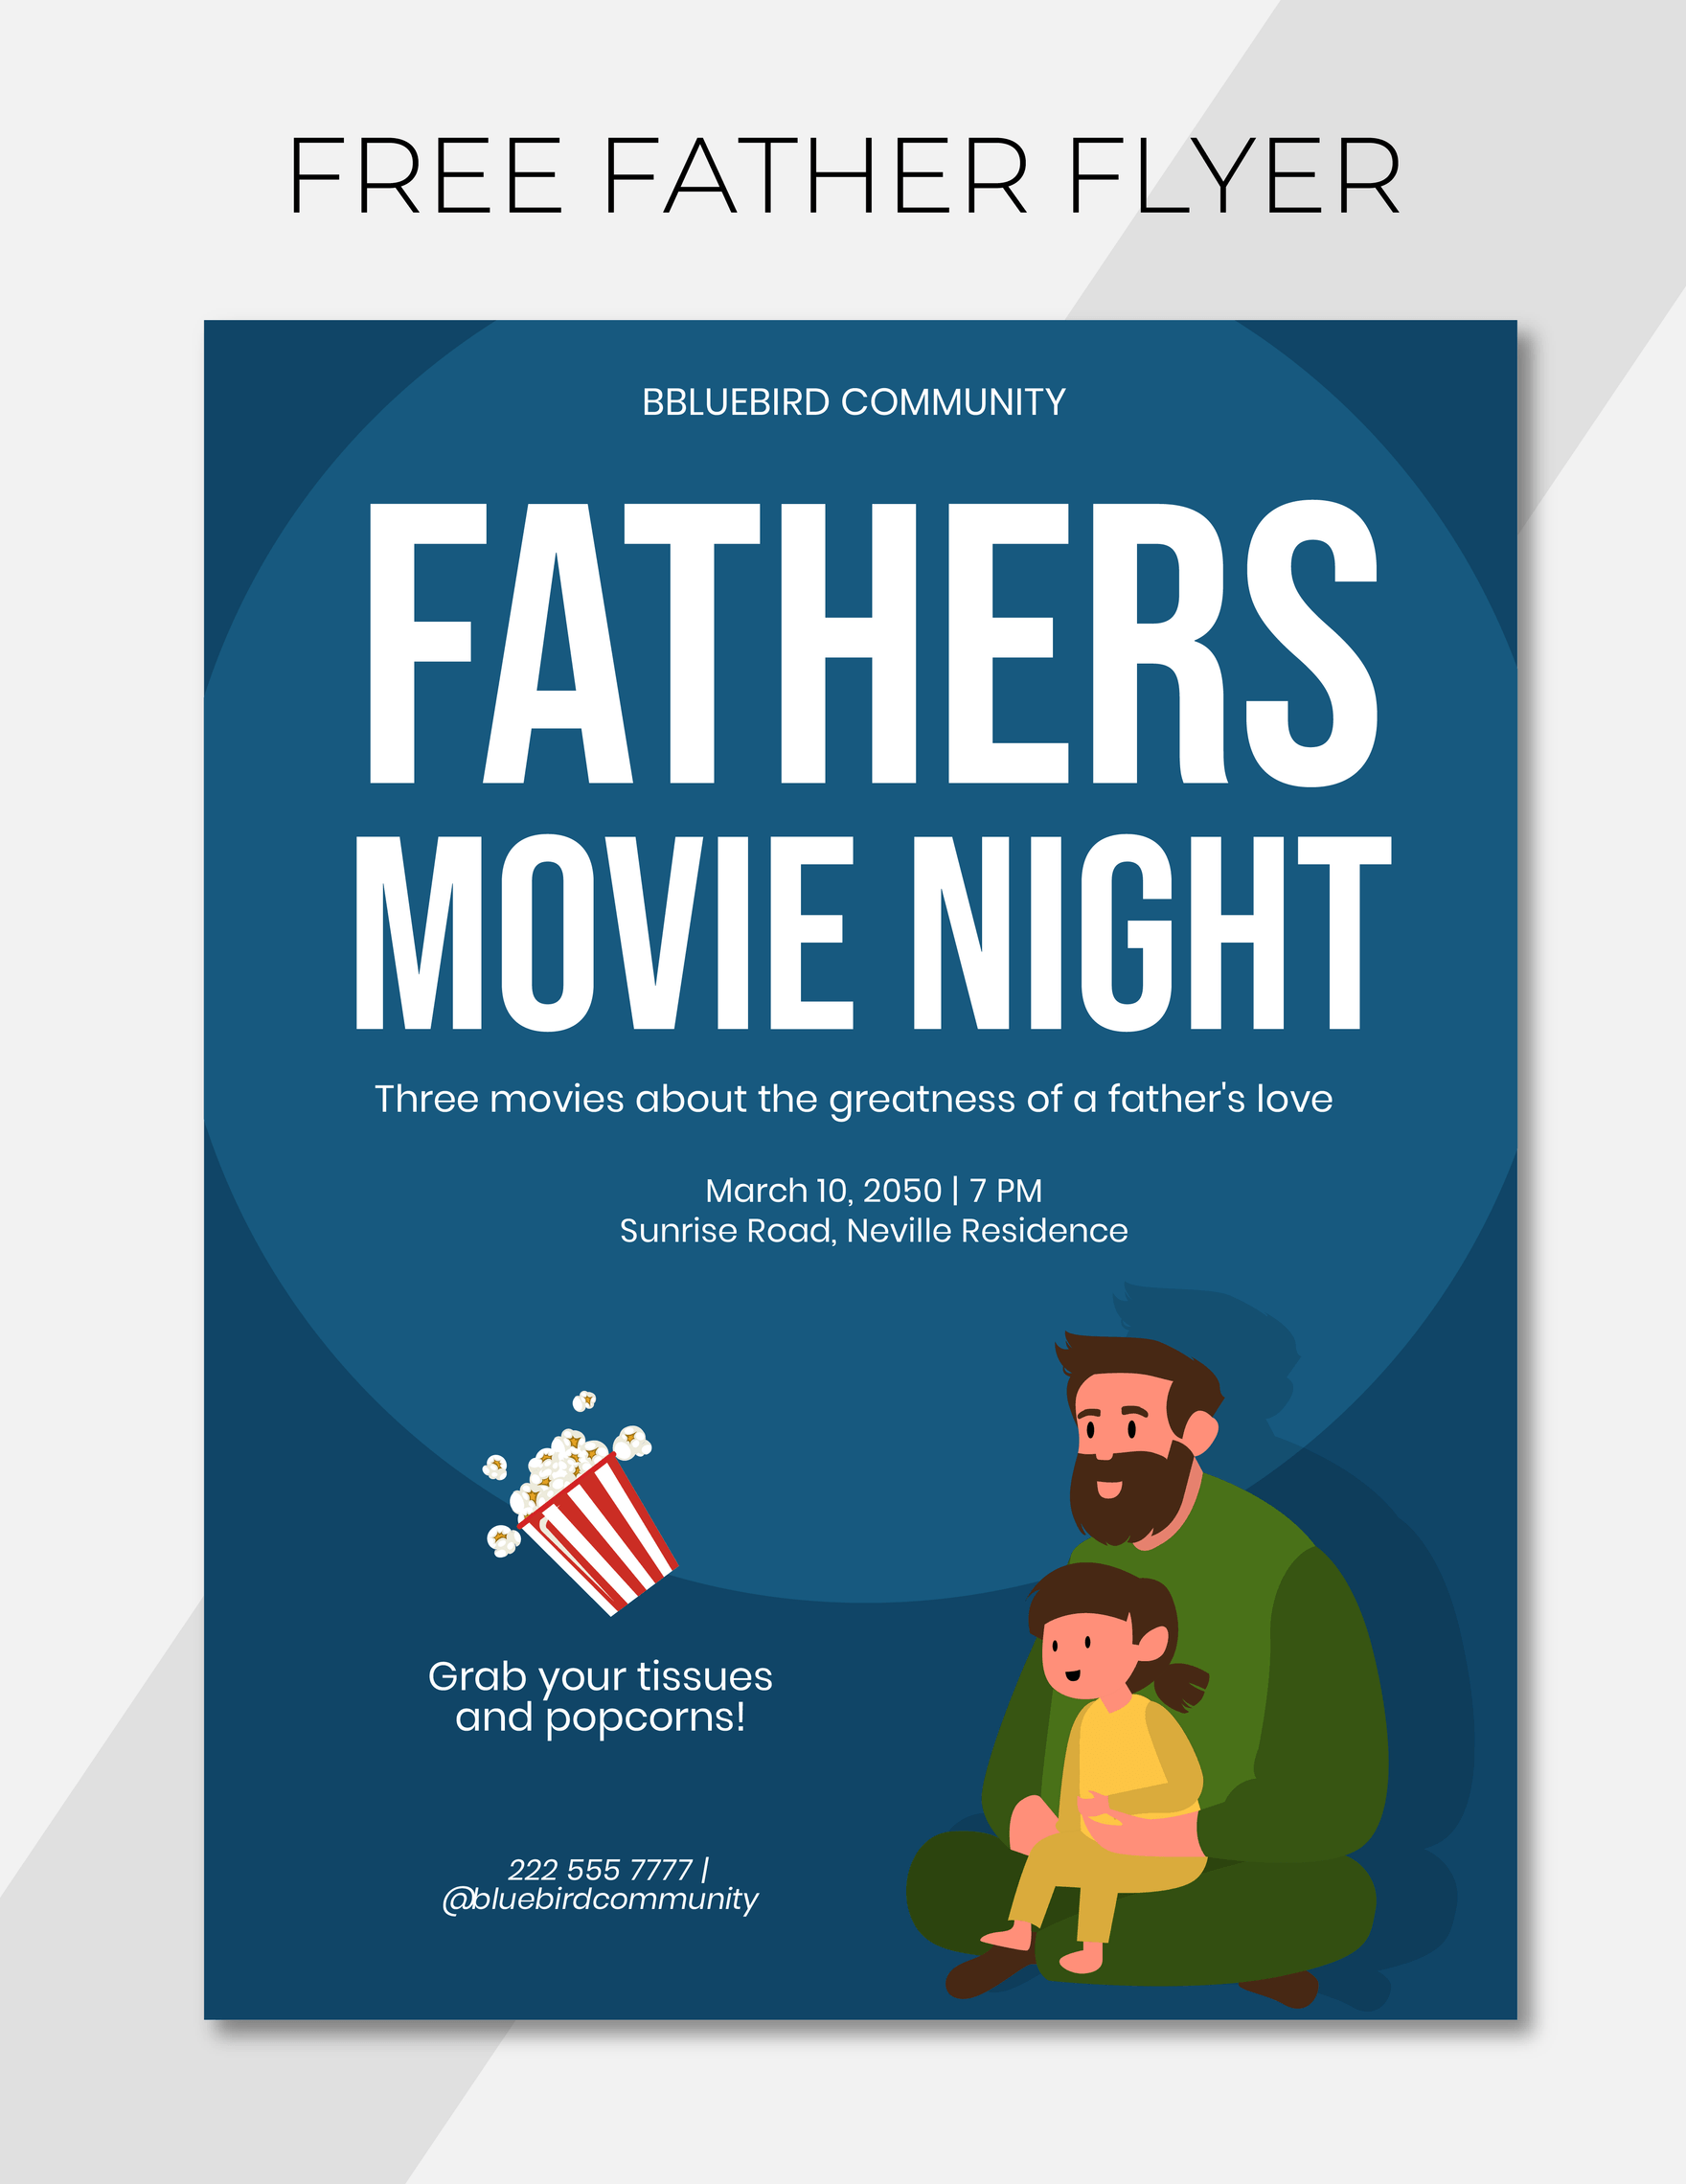 Father Flyer 